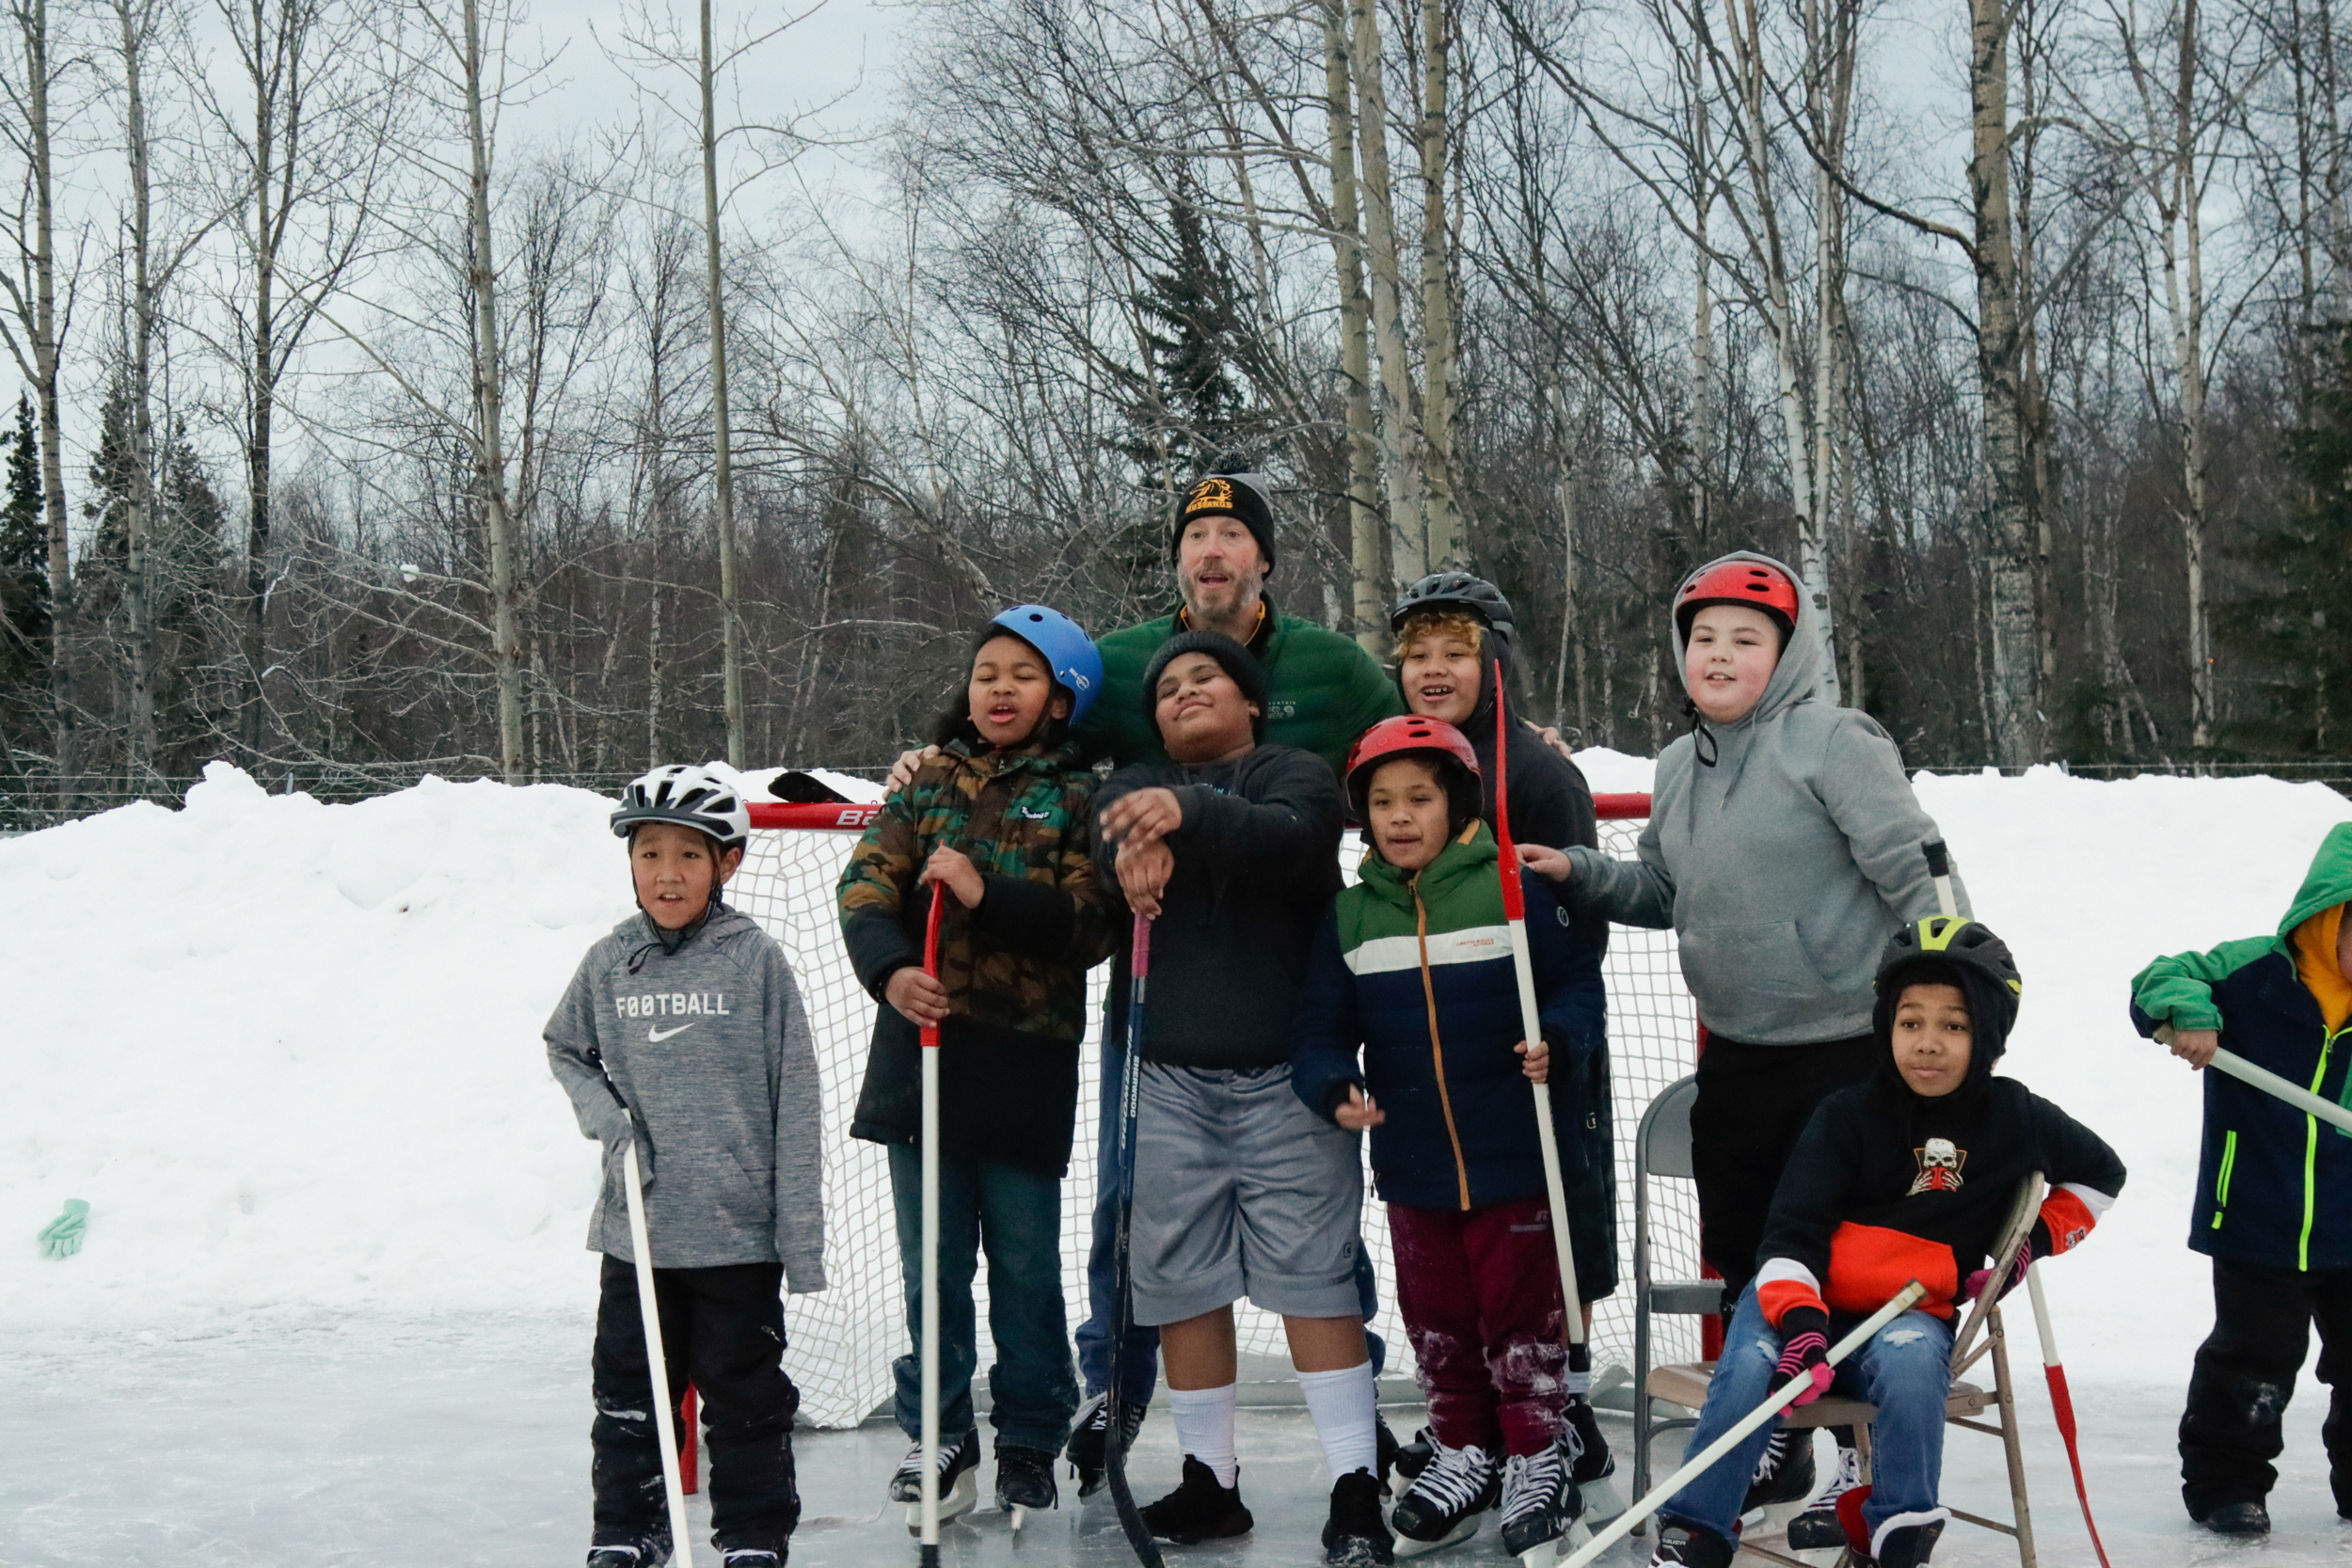 A group of children pose with their teacher in front of a hockey goal on an ice rink.